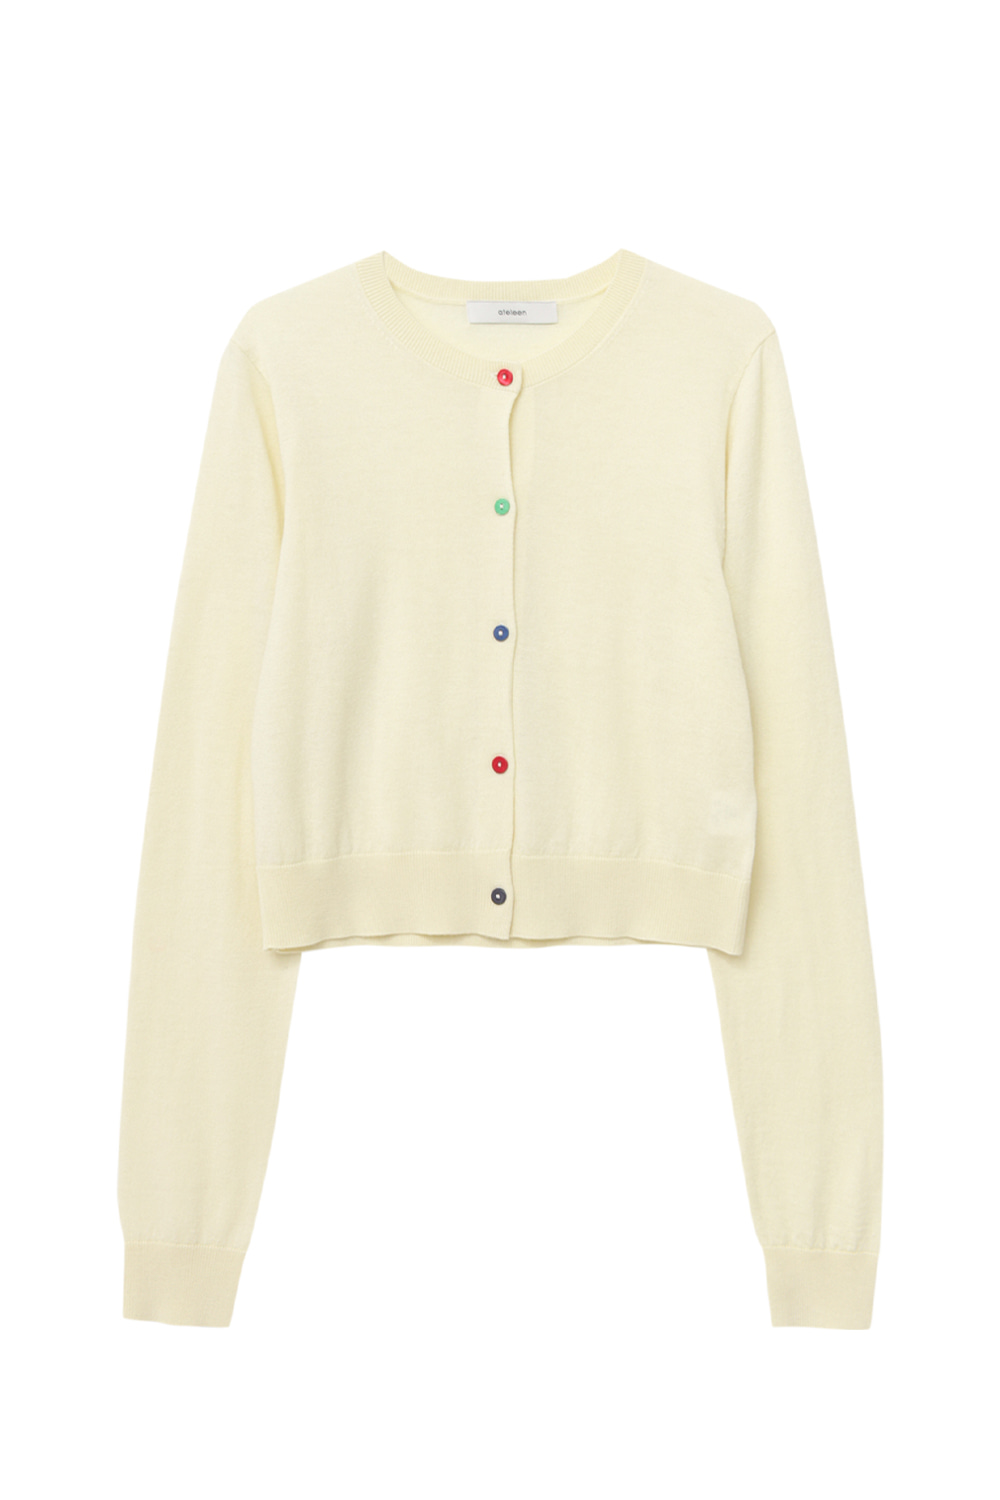 Colored Buttons Cardigan (Yellow)